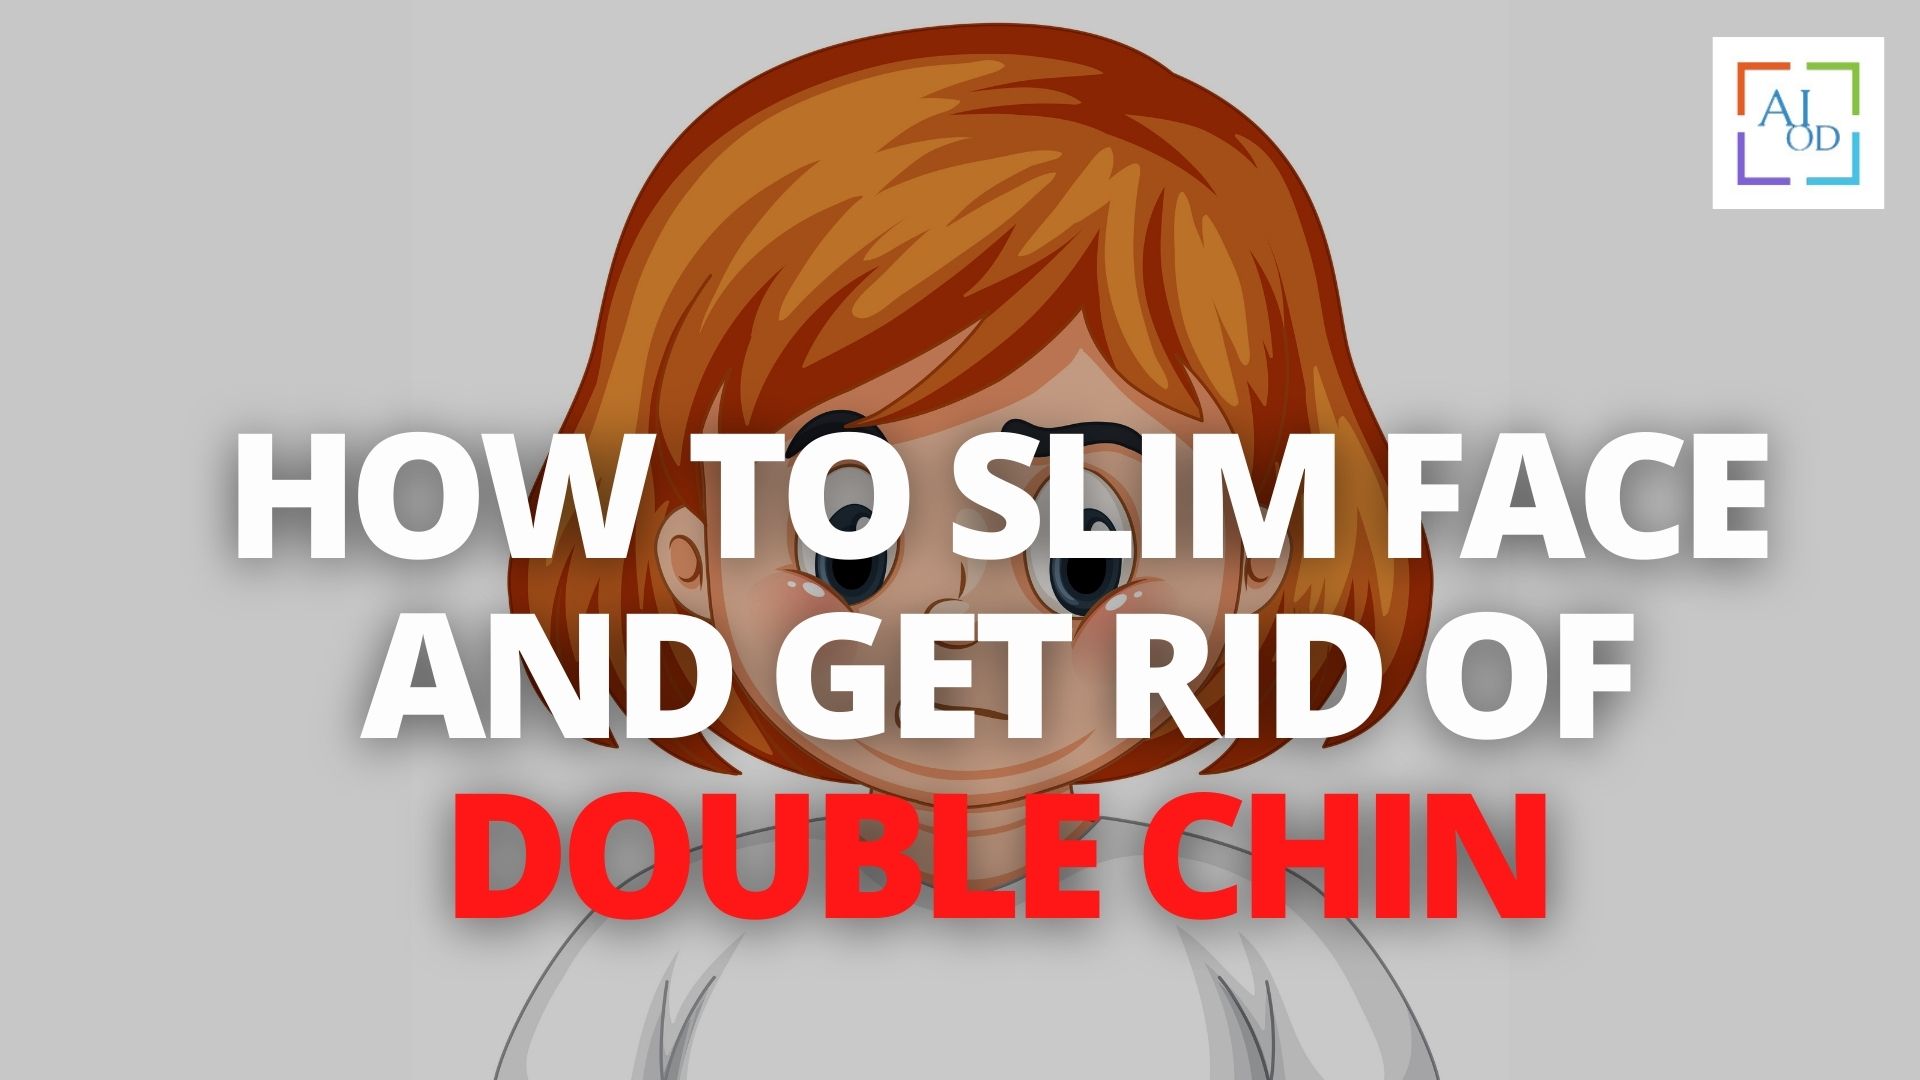 Simple and Most Effective Home Remedies/Exercises To Slim Face and Get Rid of Double Chin